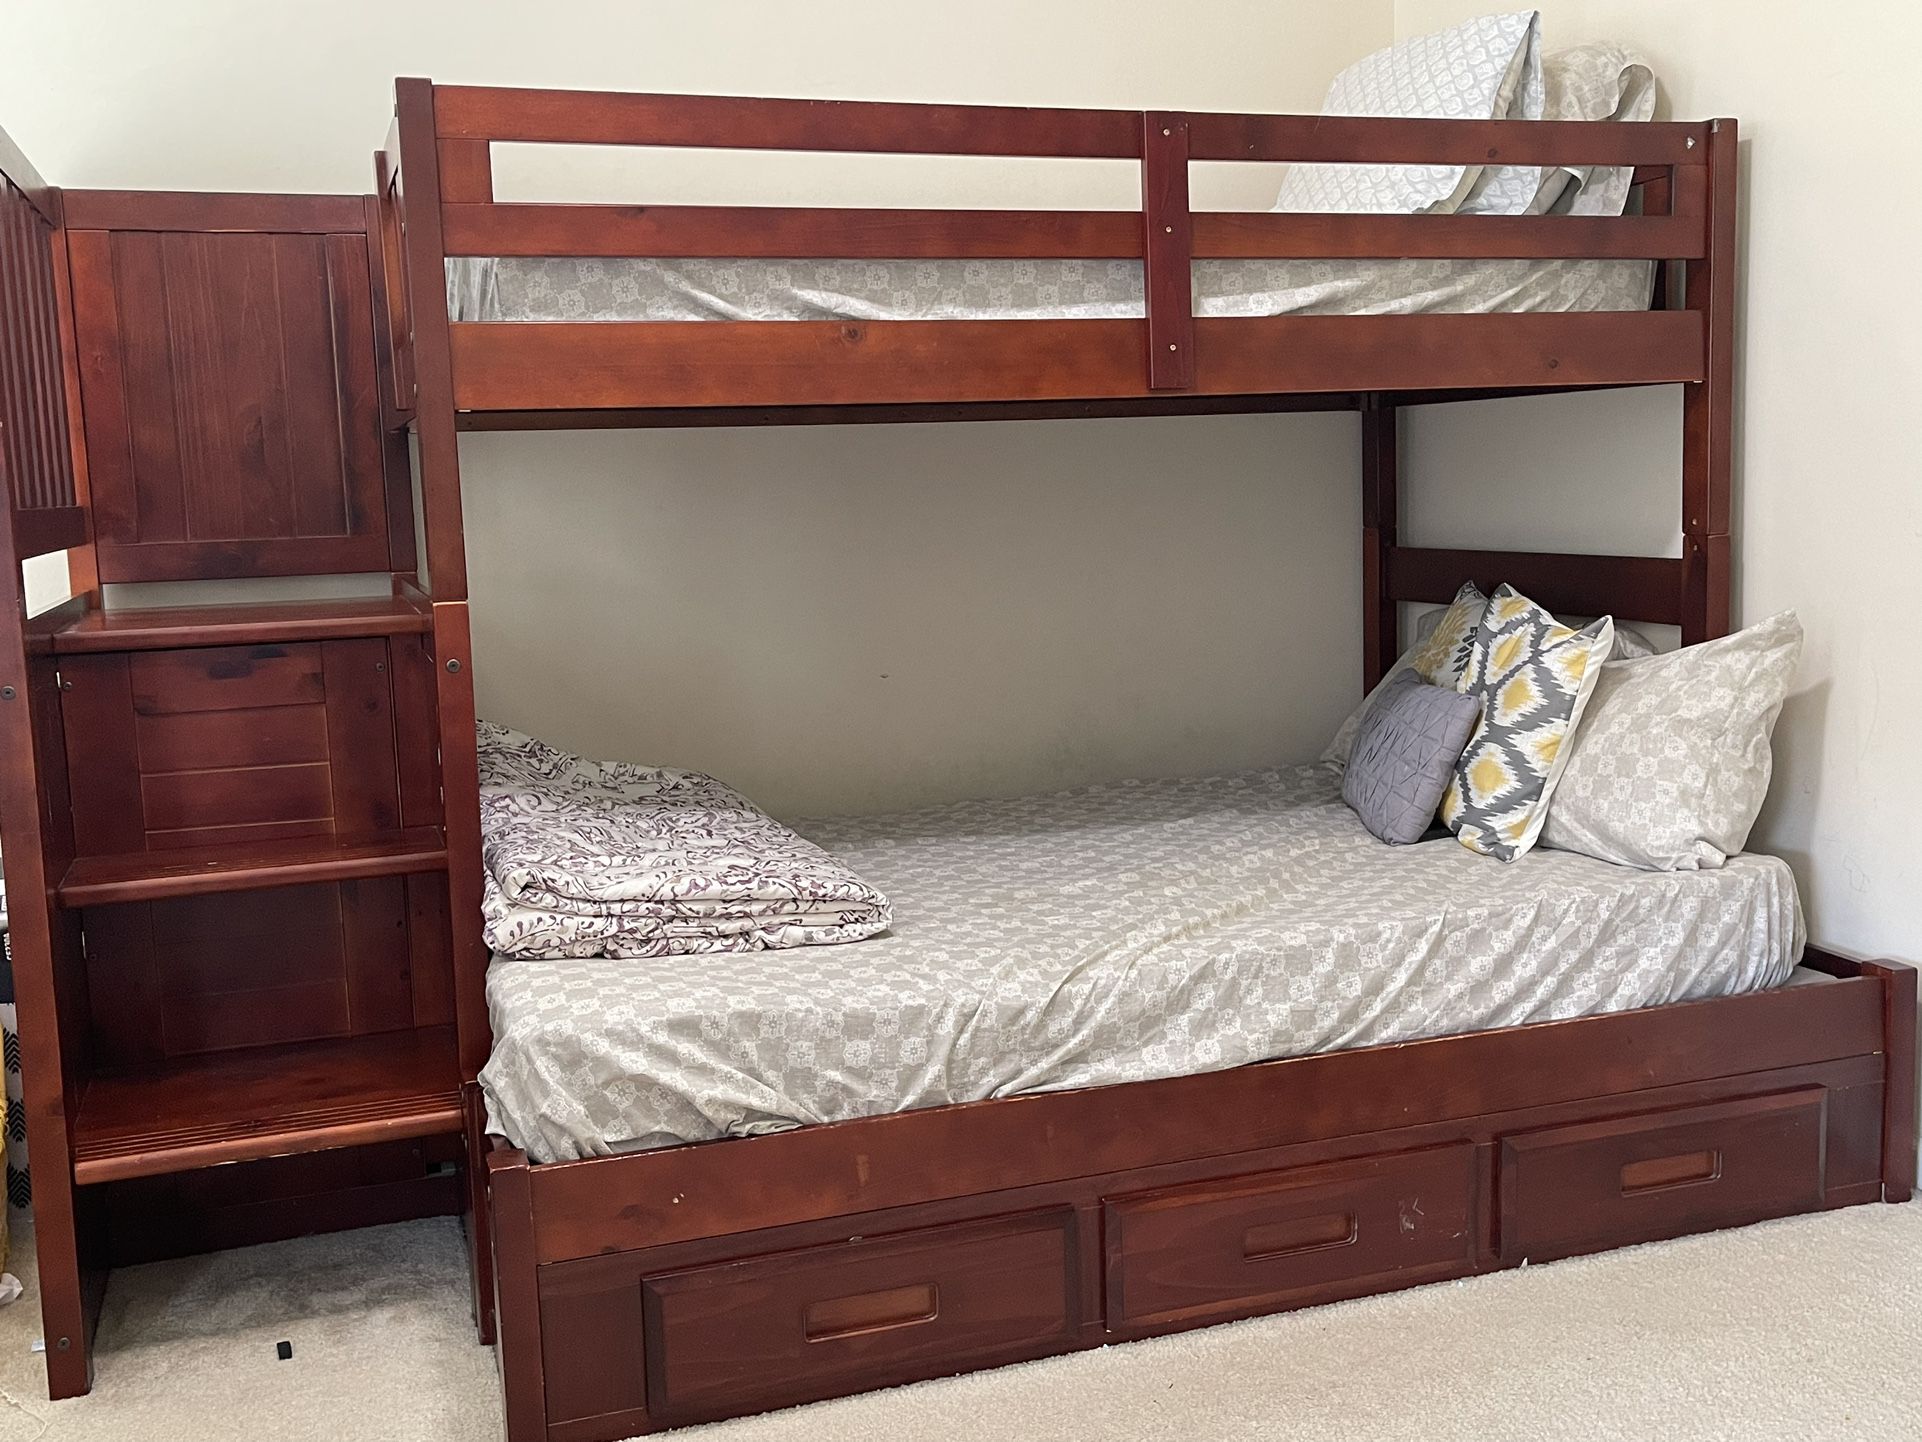 Wooden Bunk Bed- Excellent Condition